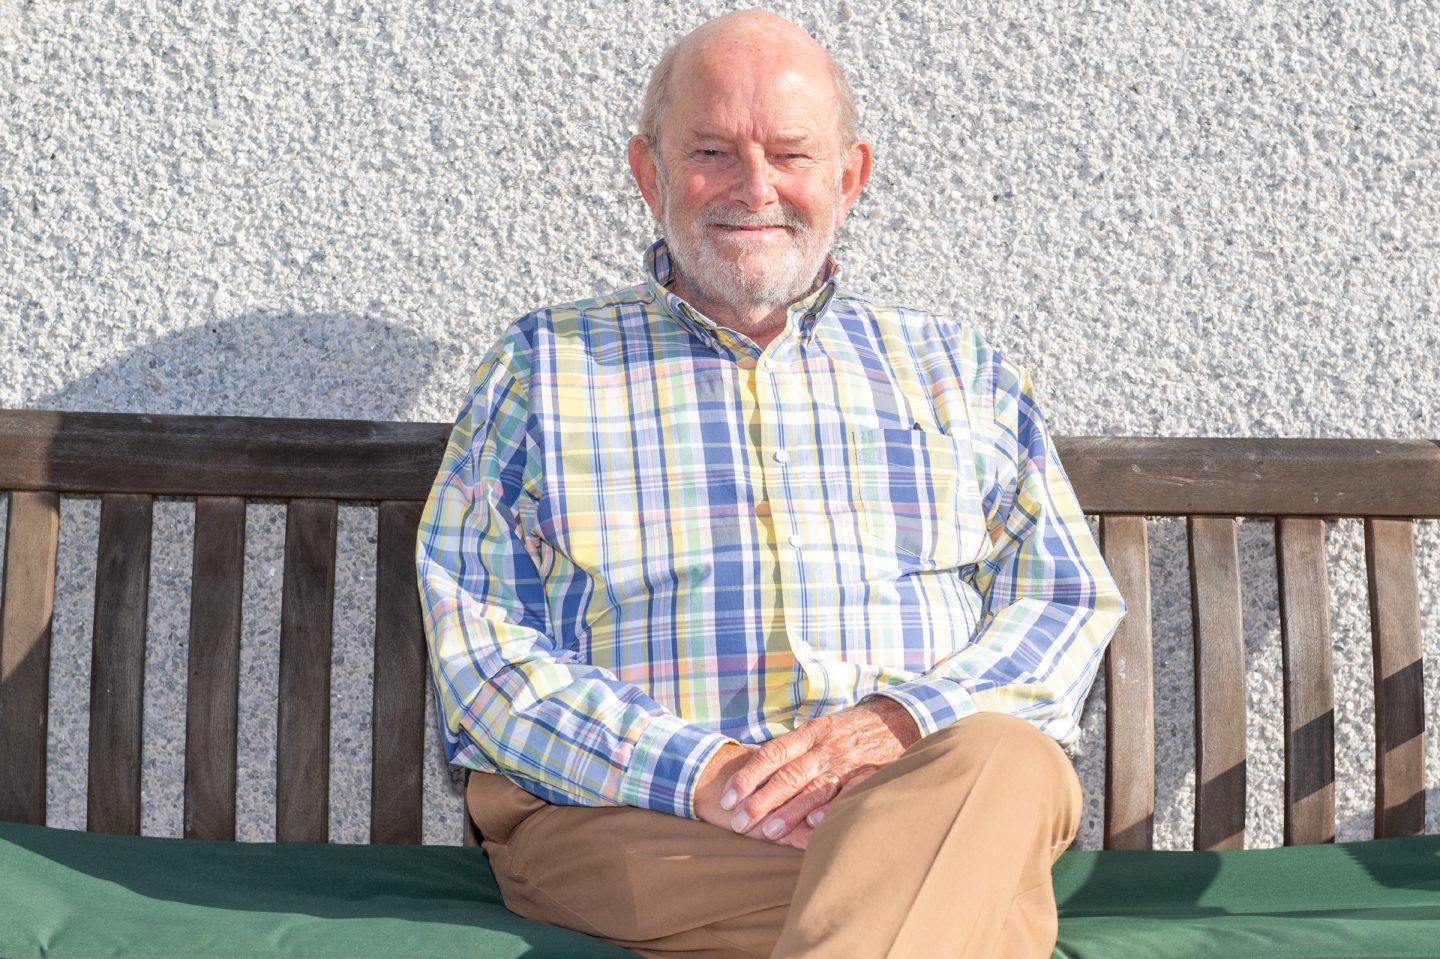 Geoff sitting on a bench in his garden. He's spoken about impact of osteoporosis on men